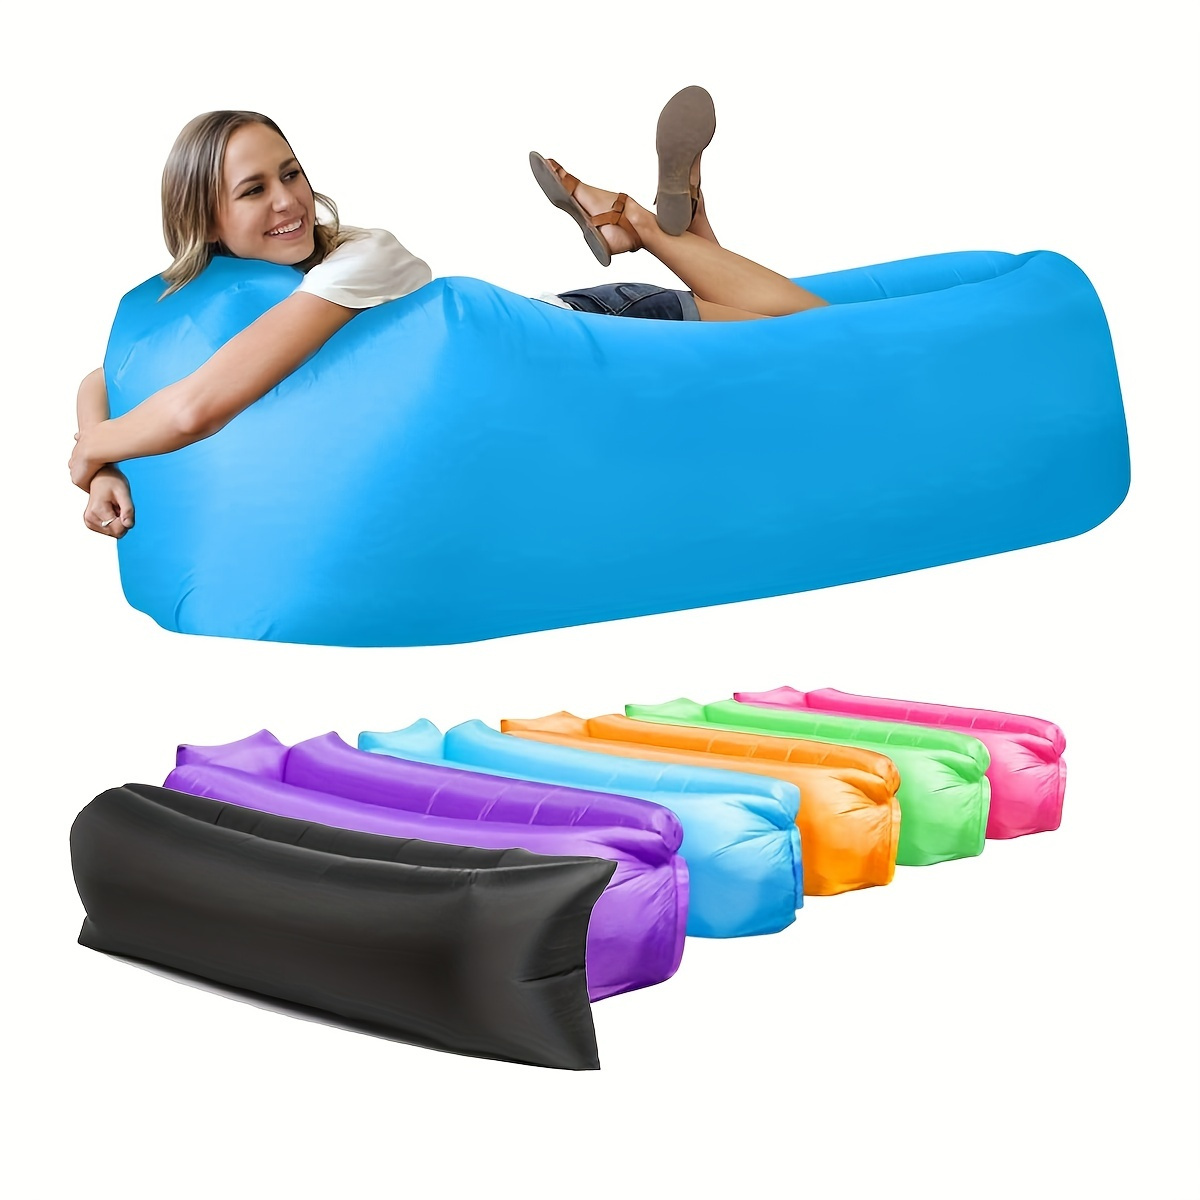 

Portable Inflatable Lounger - Waterproof, Perfect For Beach, Camping, Picnics, And Music Festivals - Comfortable Lazy Sofa